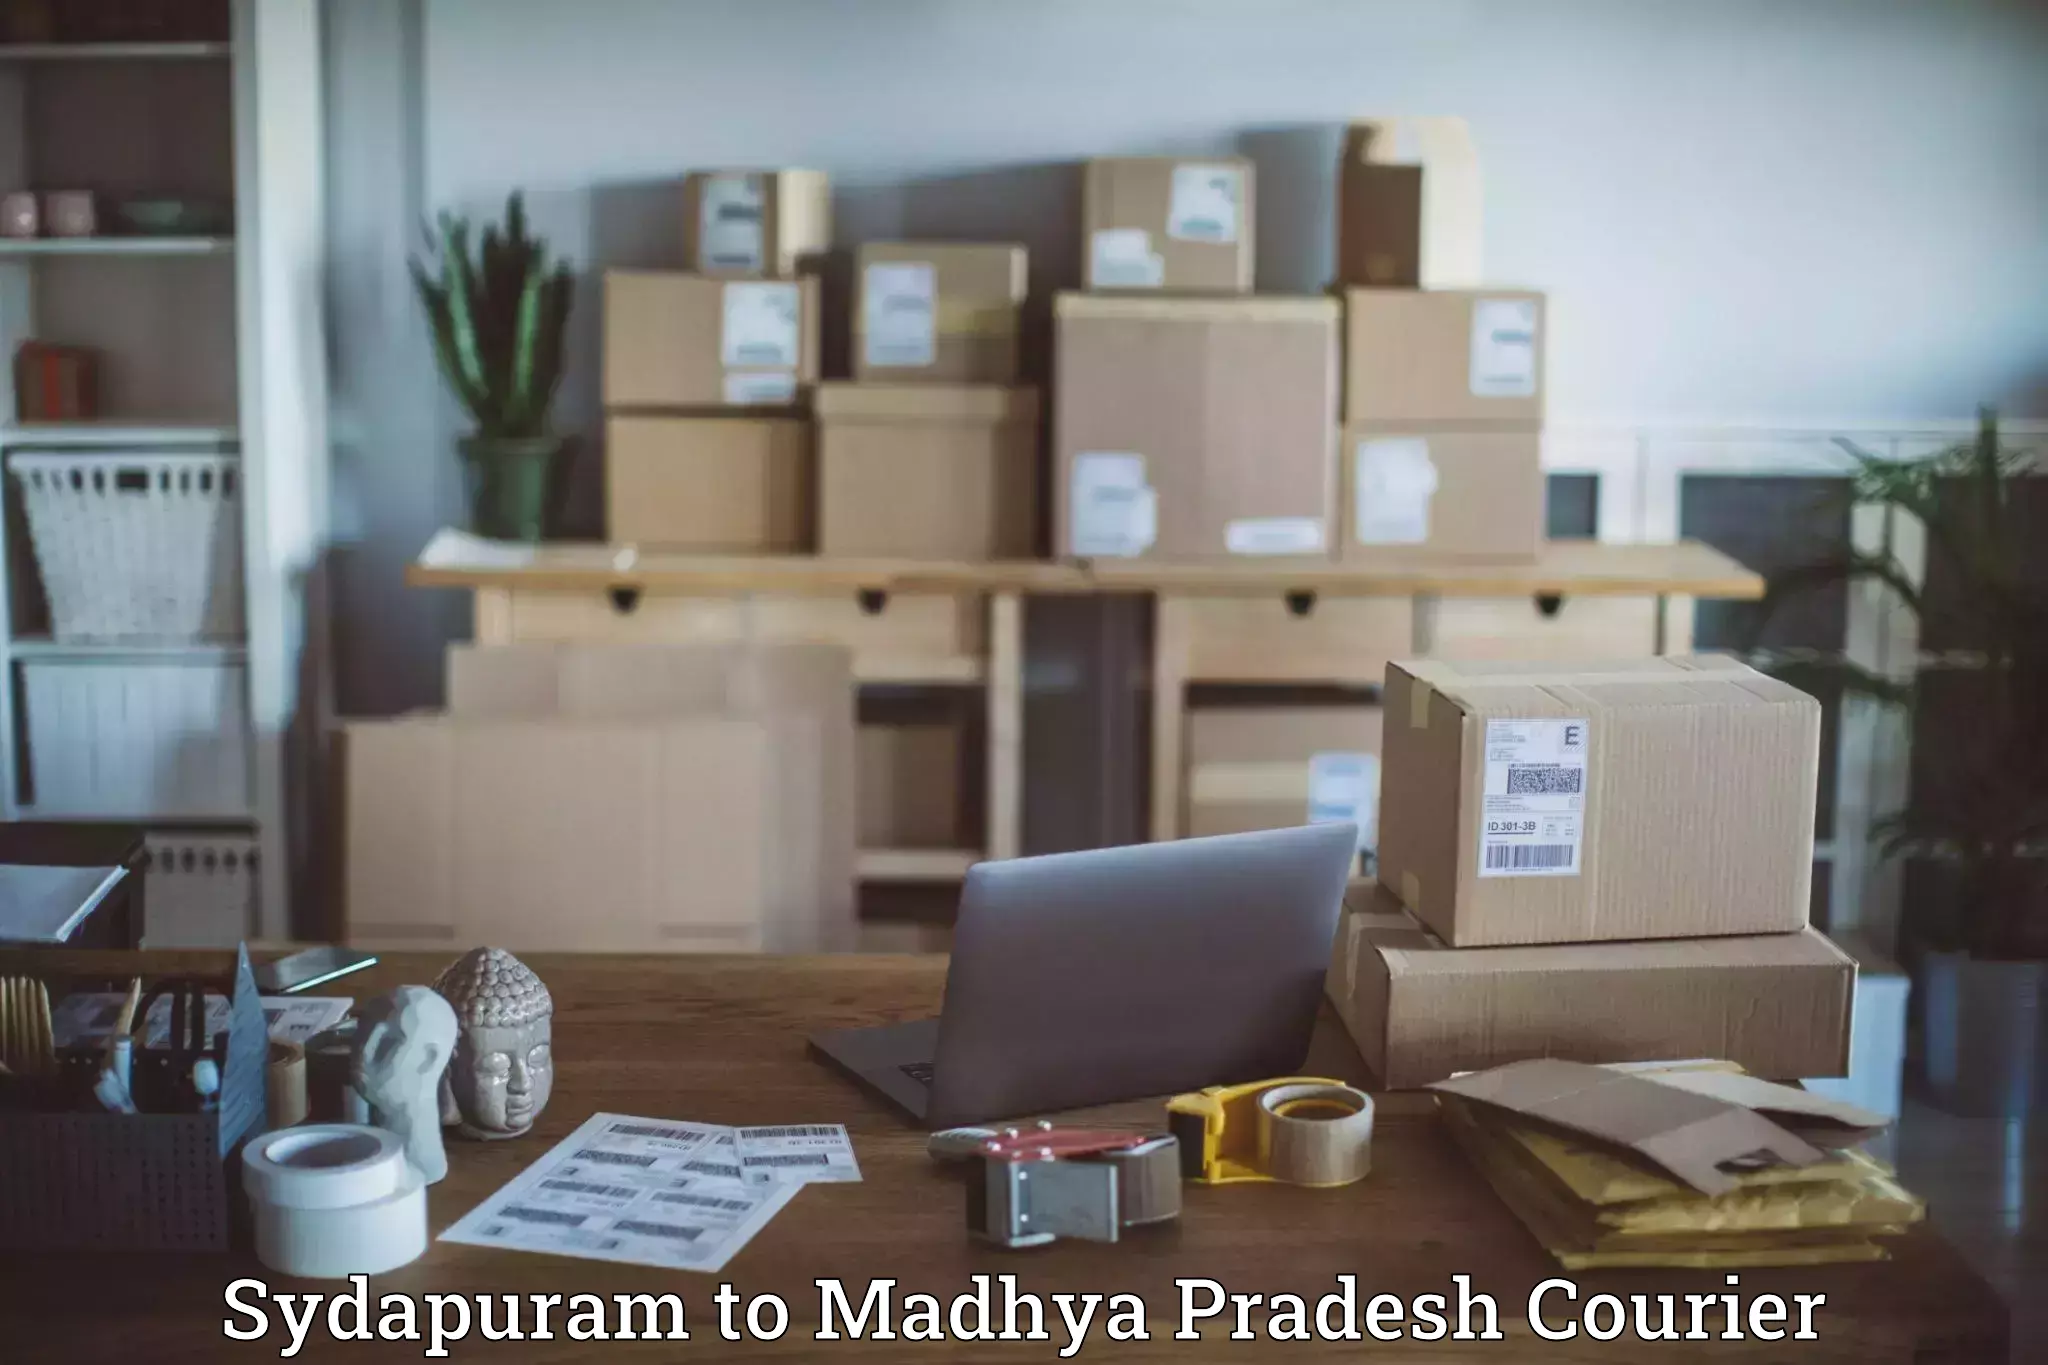 State-of-the-art courier technology Sydapuram to Gotegaon